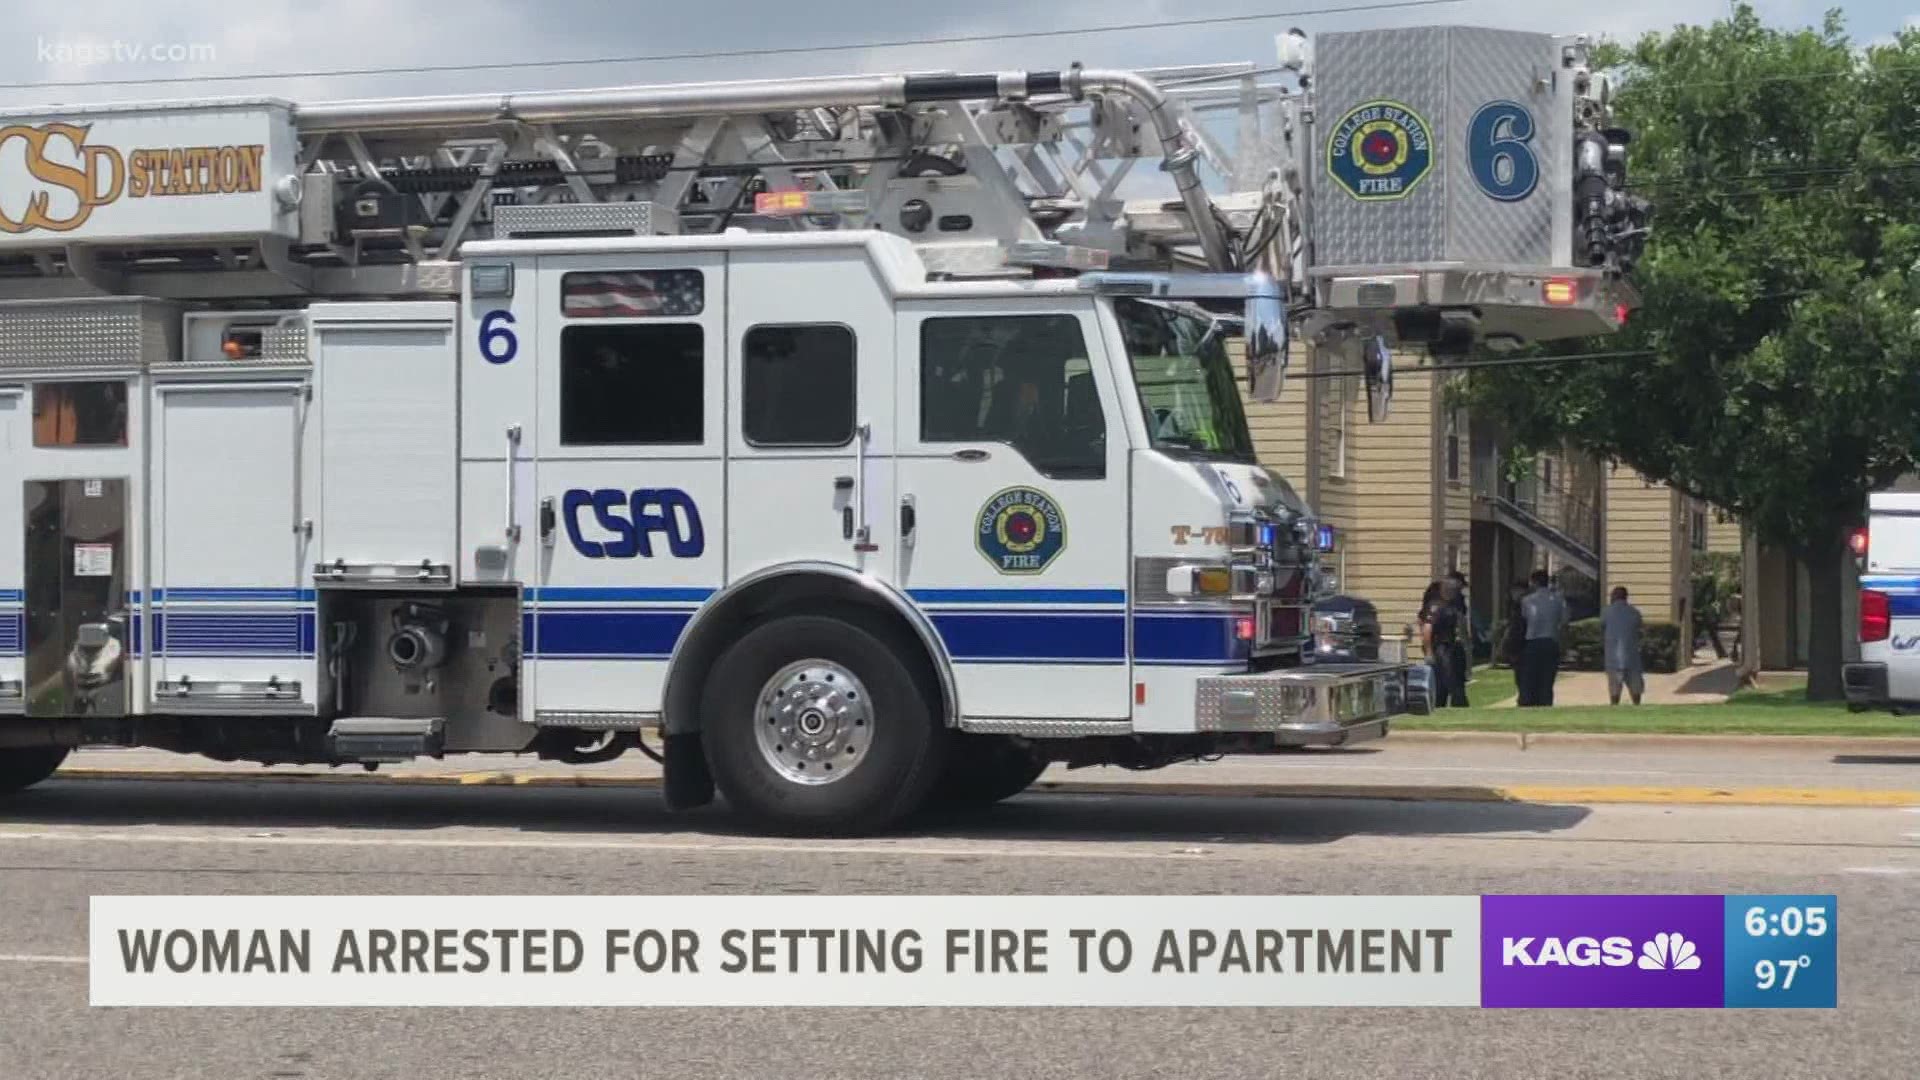 Authorities said the woman admitted to lighting the fire in the back bedroom.